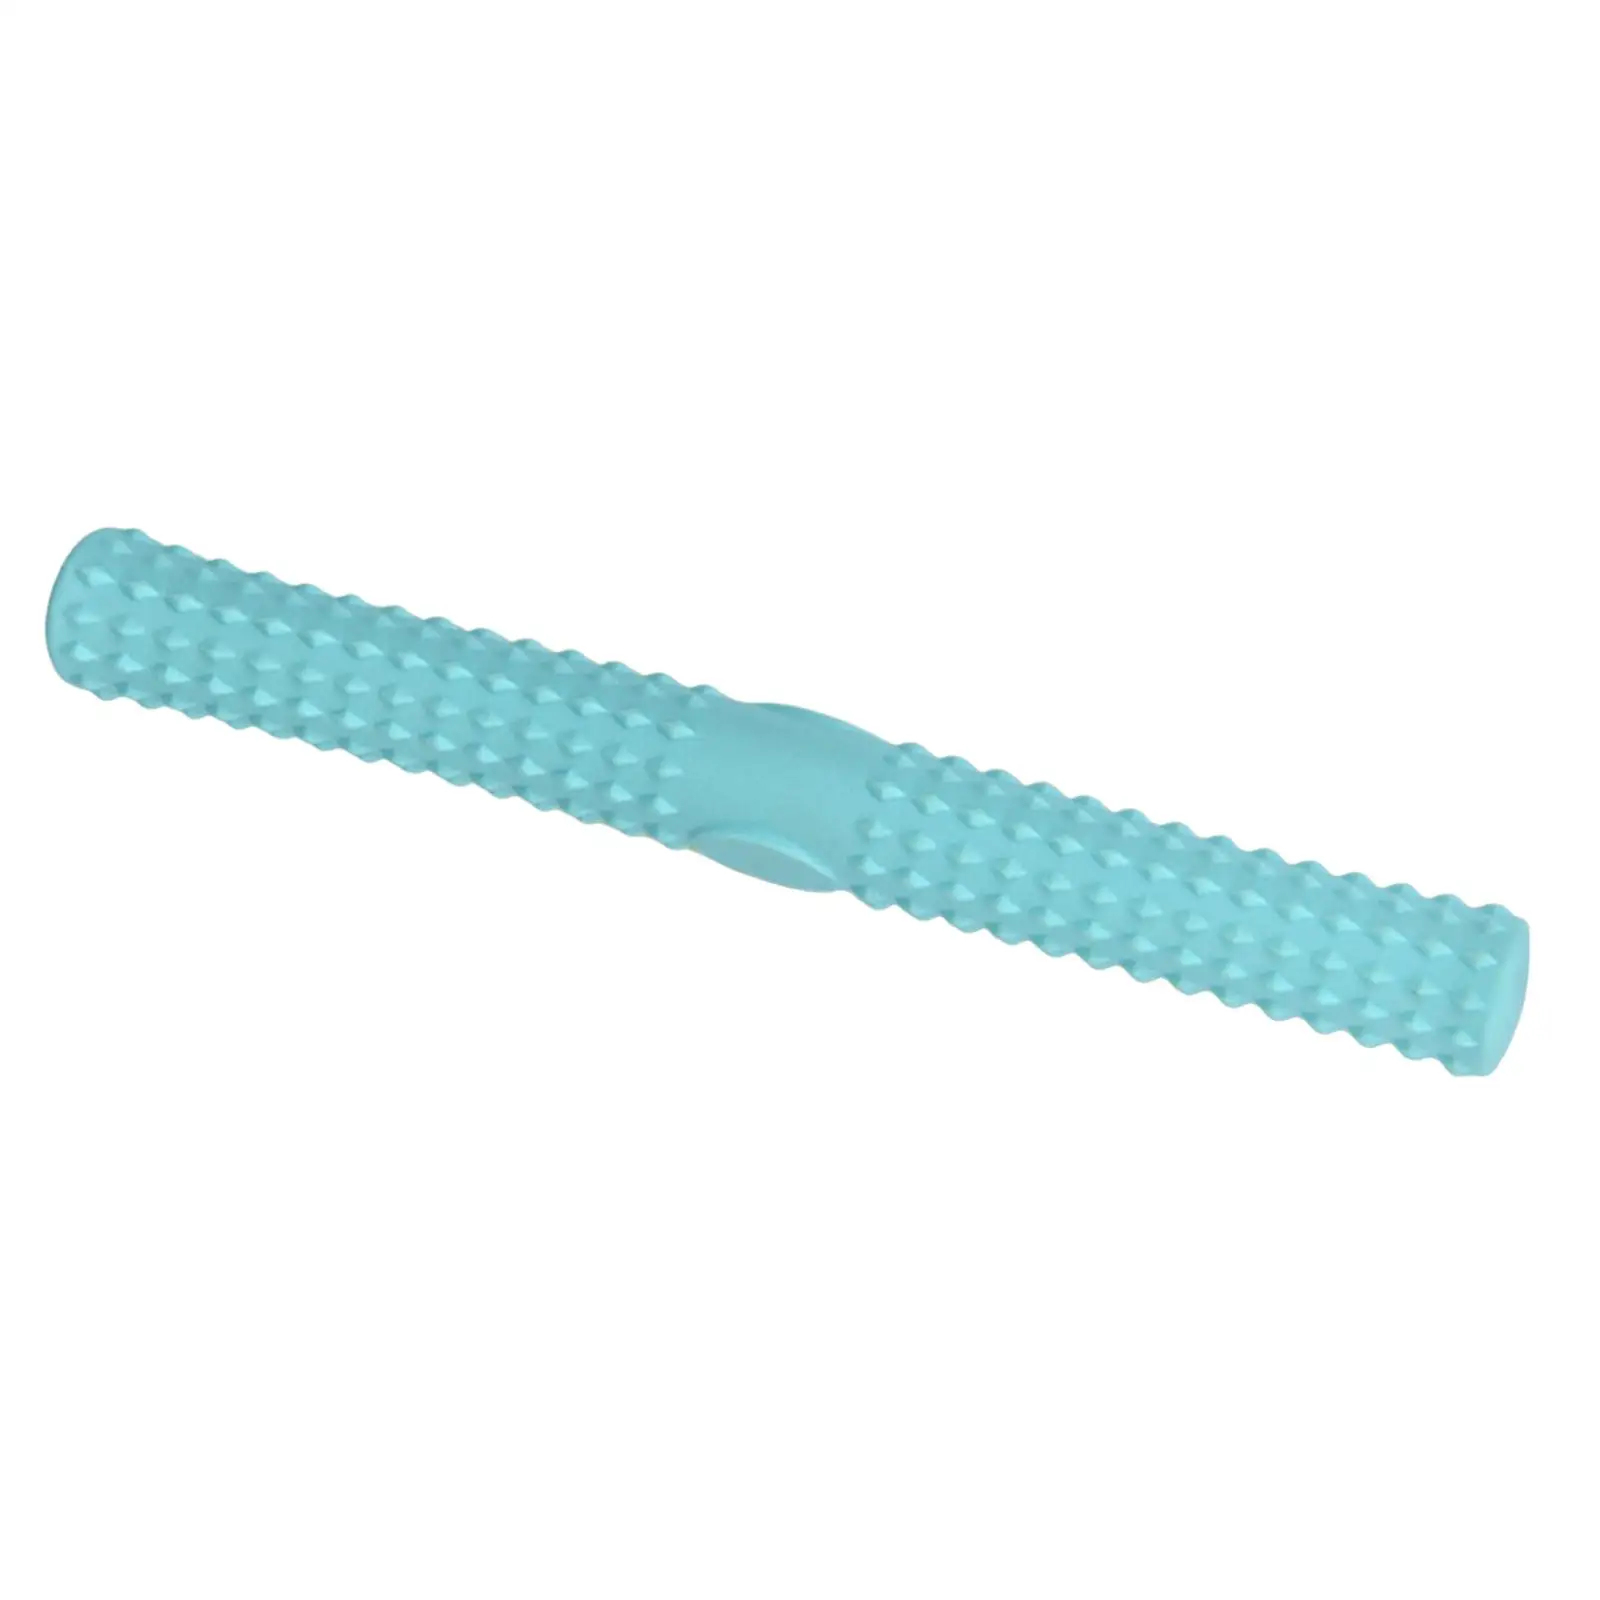 Twist Exerciser Bars Handheld Home Gym Muscle Roller Tool Body Massage Stick for Legs Neck Relaxing Meridian Clap Full Body